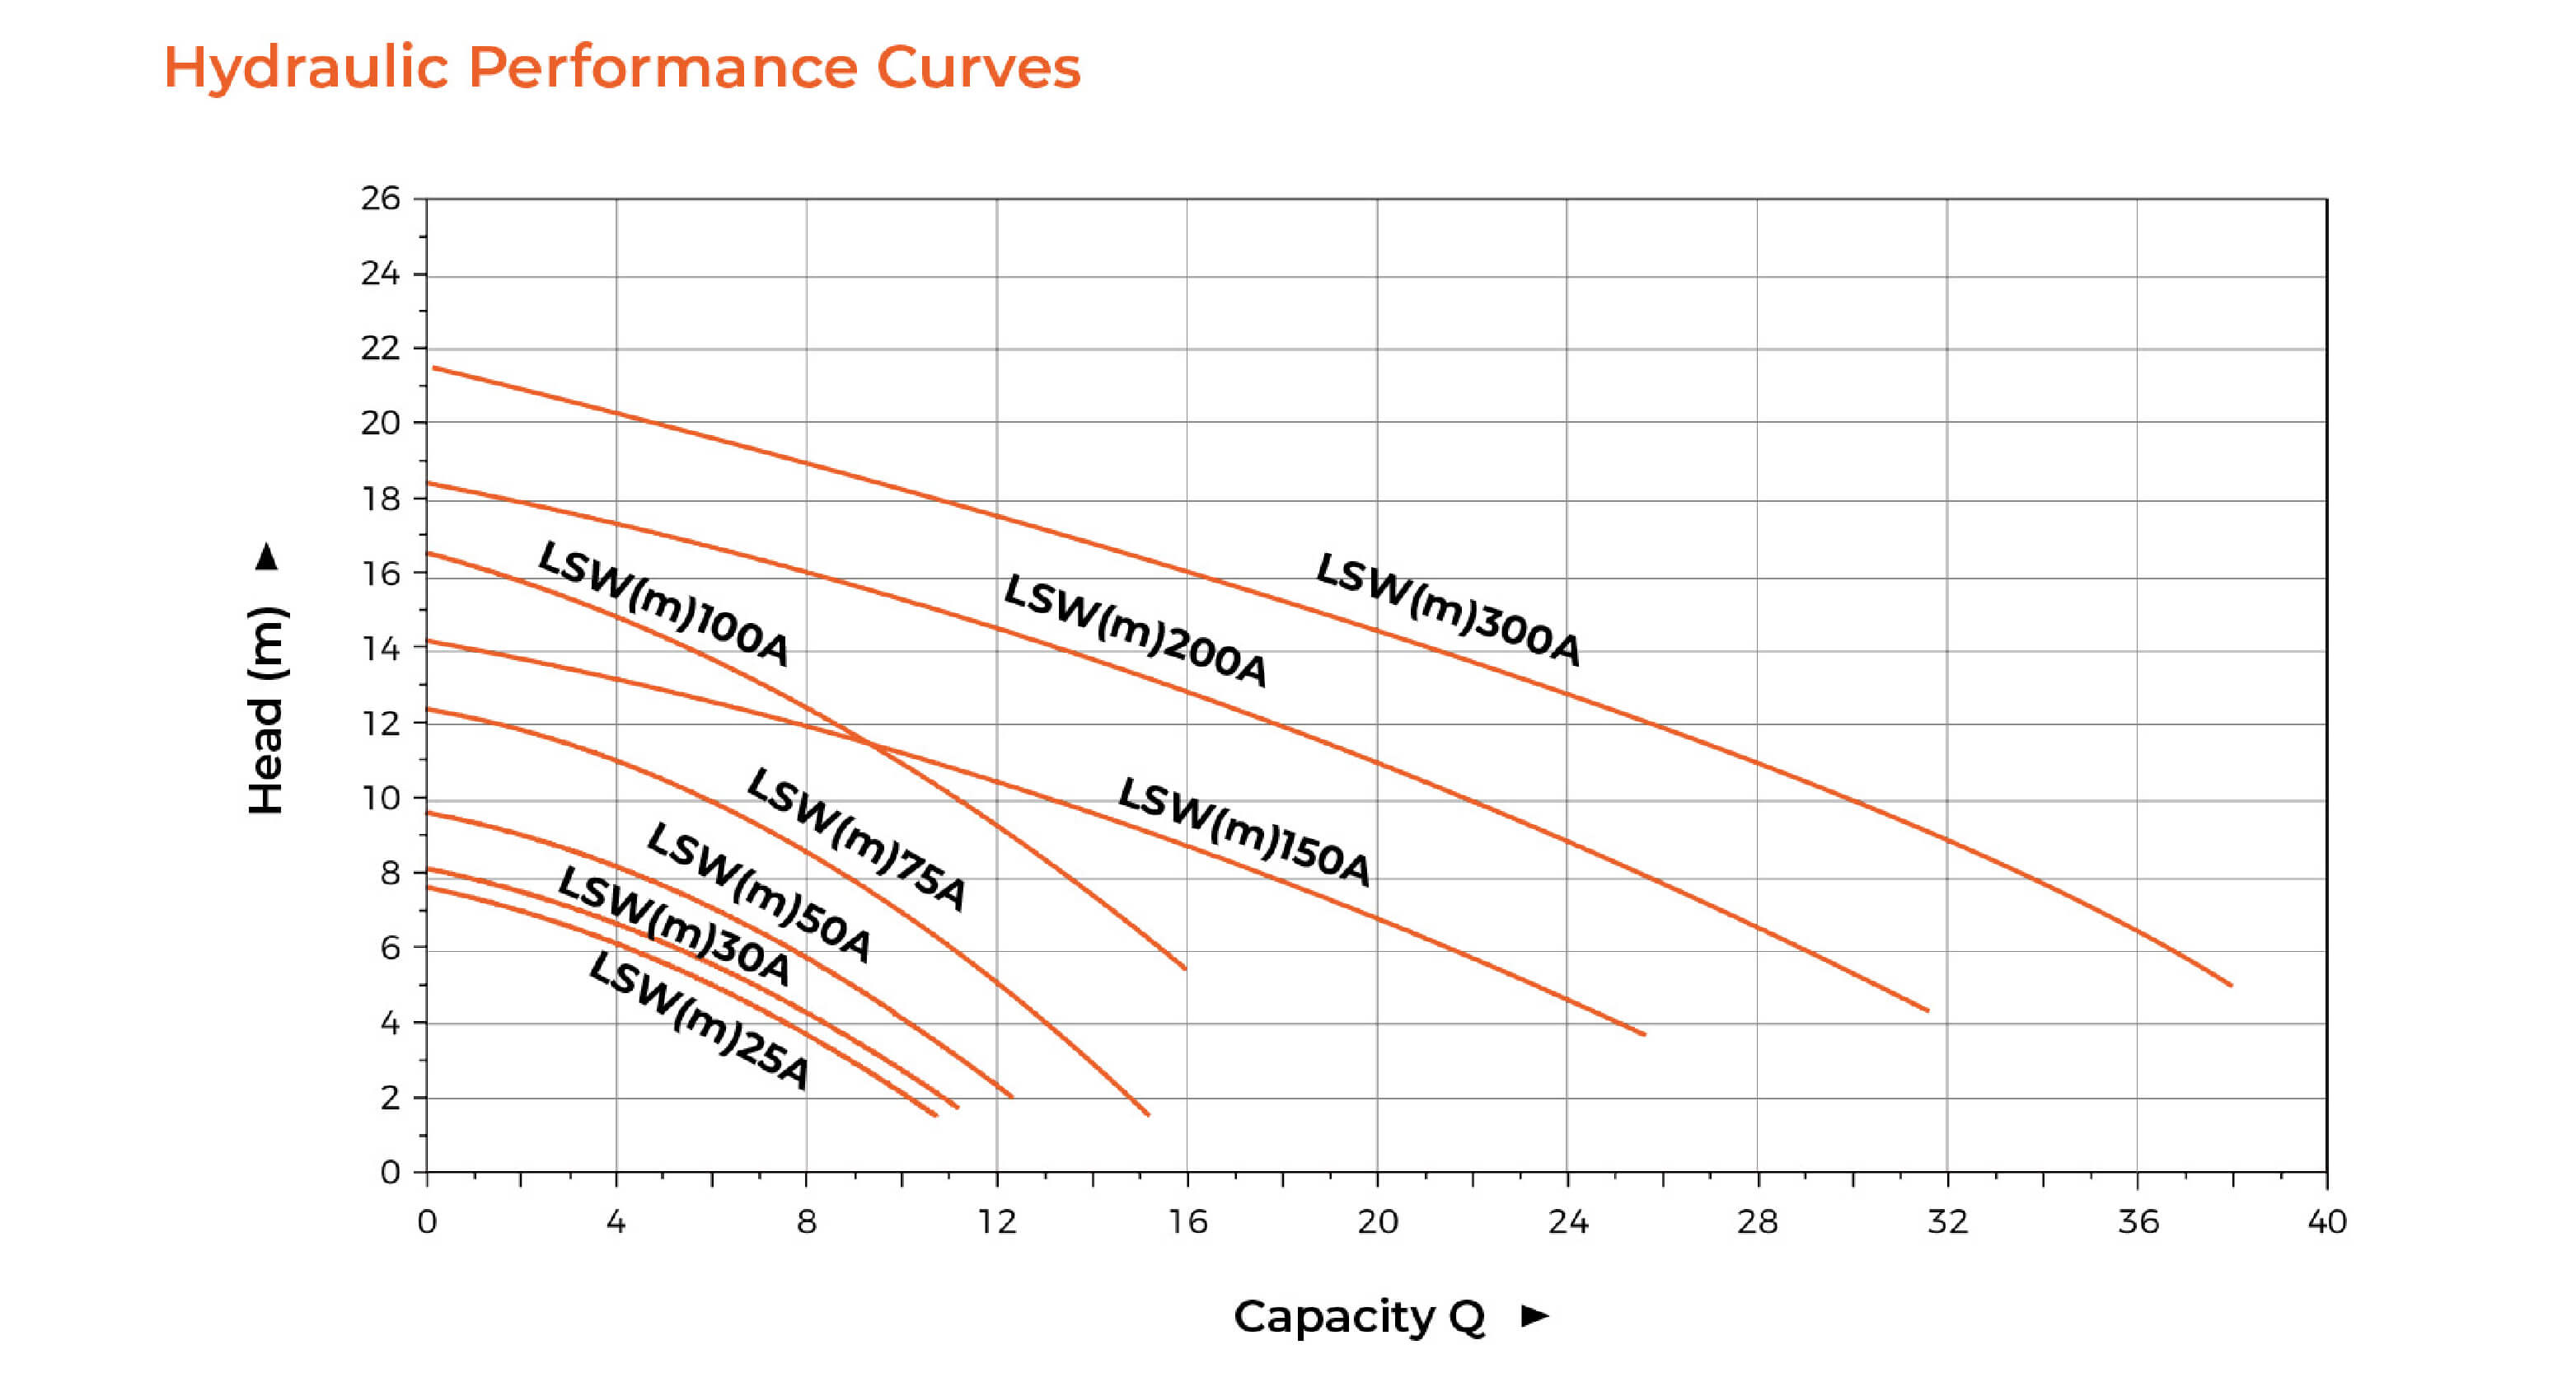 LSW Sewage Submersible Pump Hydraulic Performance Curves